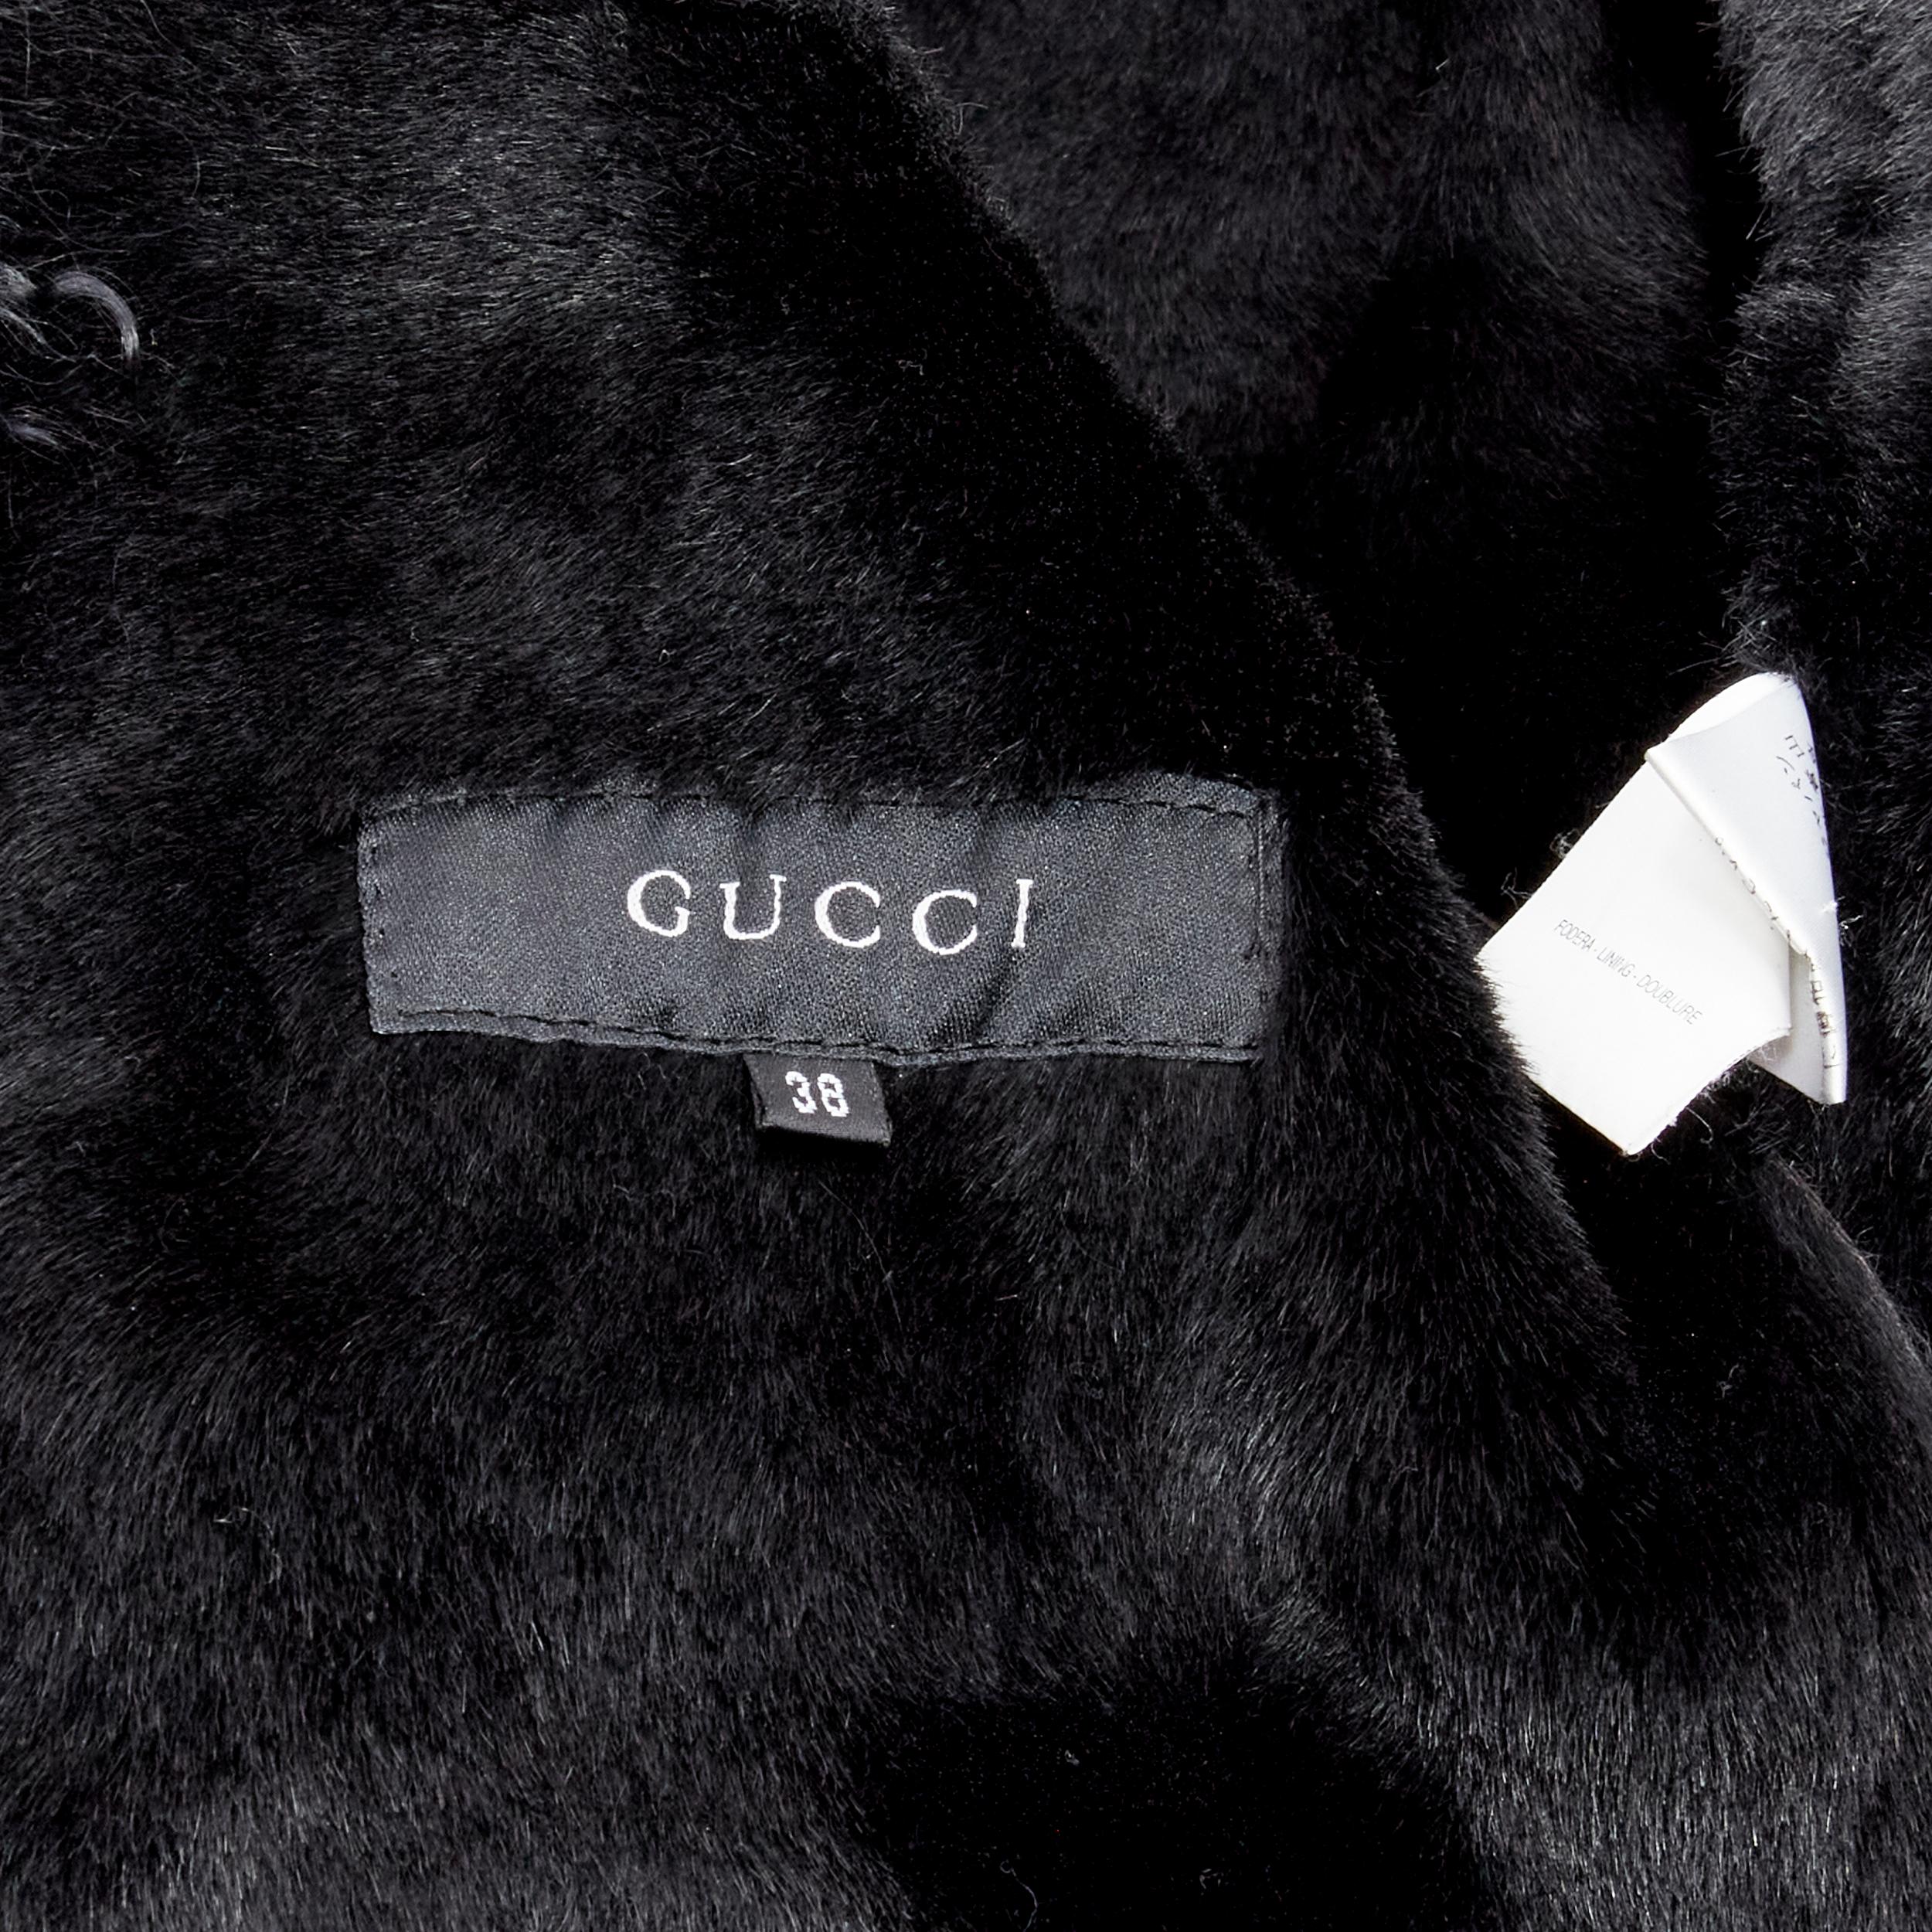 GUCCI TOM FORD 1999 Runway black shearling fur suede leather belted coat IT38 XS 6